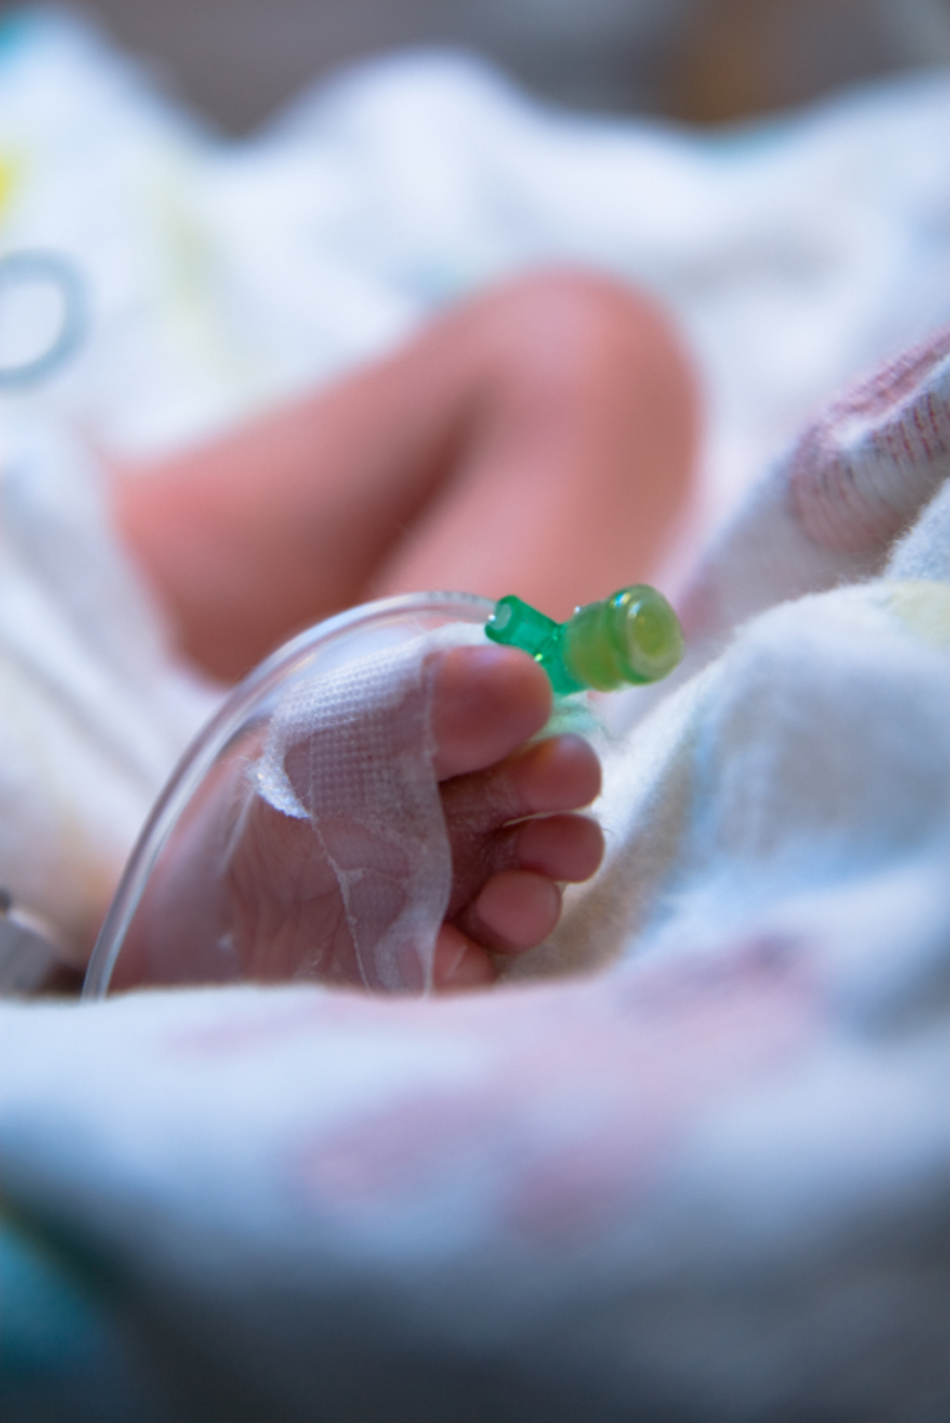 What Happens to Babies in the NICU?